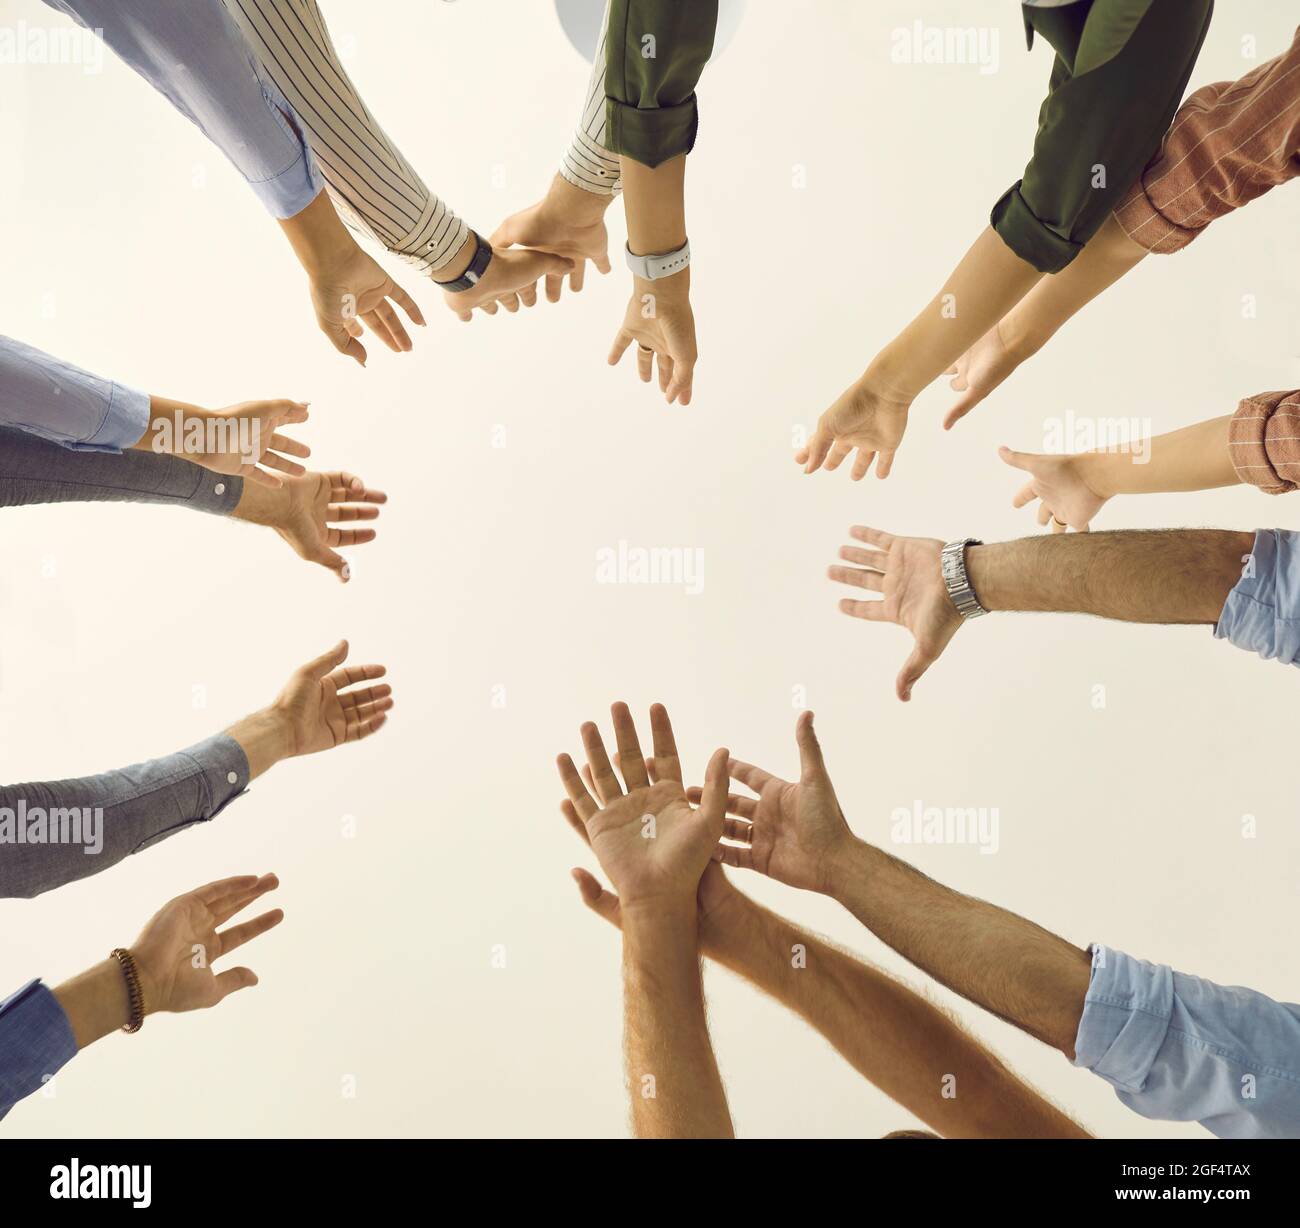 Shot from below of community or team of people reaching up together and joining hands Stock Photo